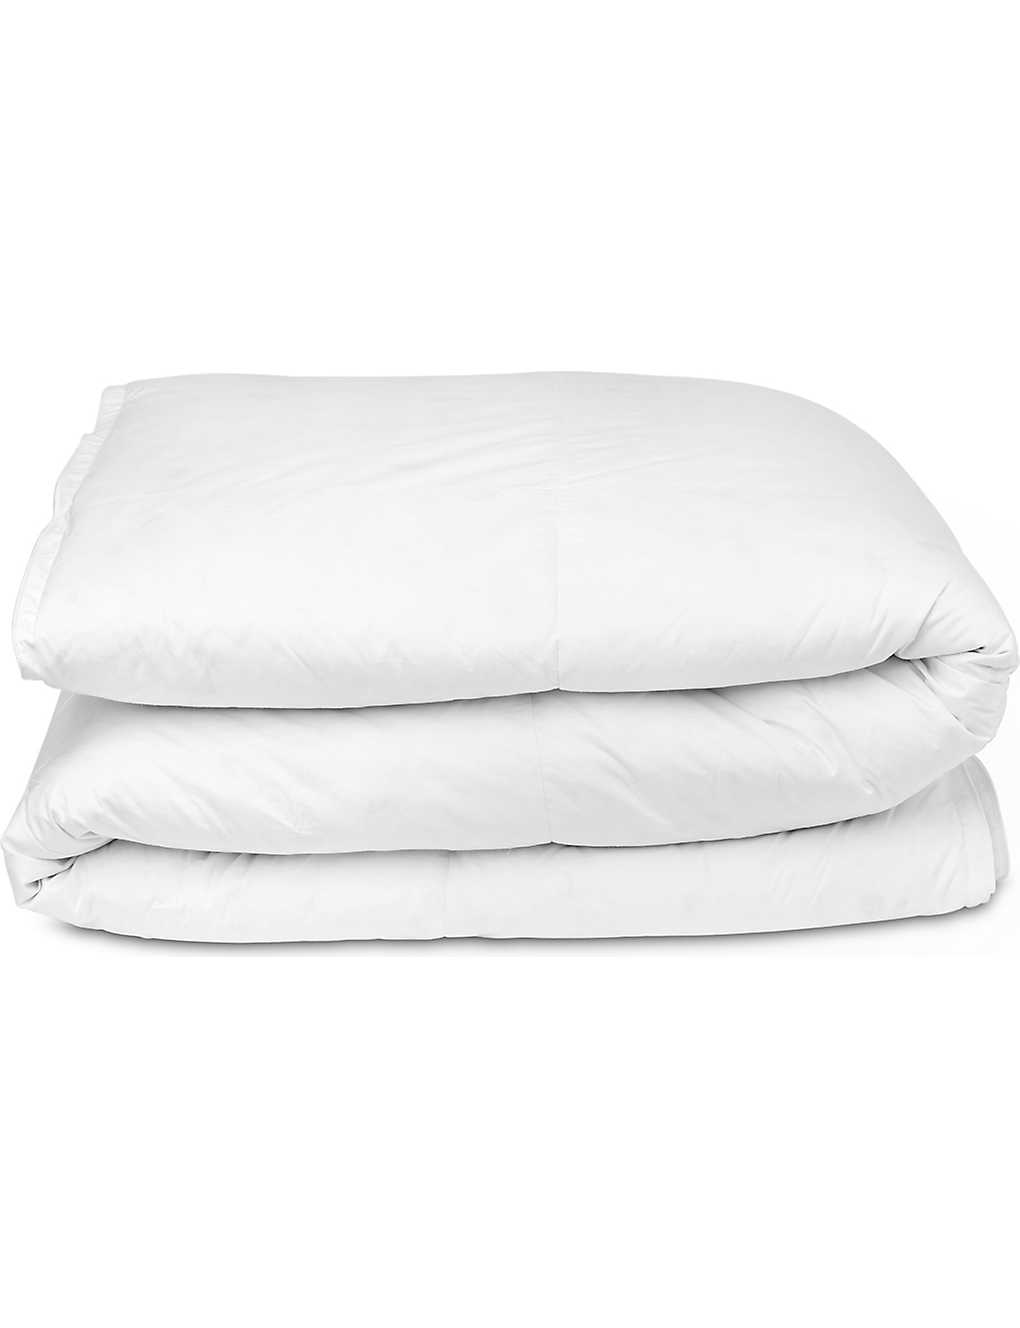 Selfridges New White Duck Feather And Down Four Seasons Duvet